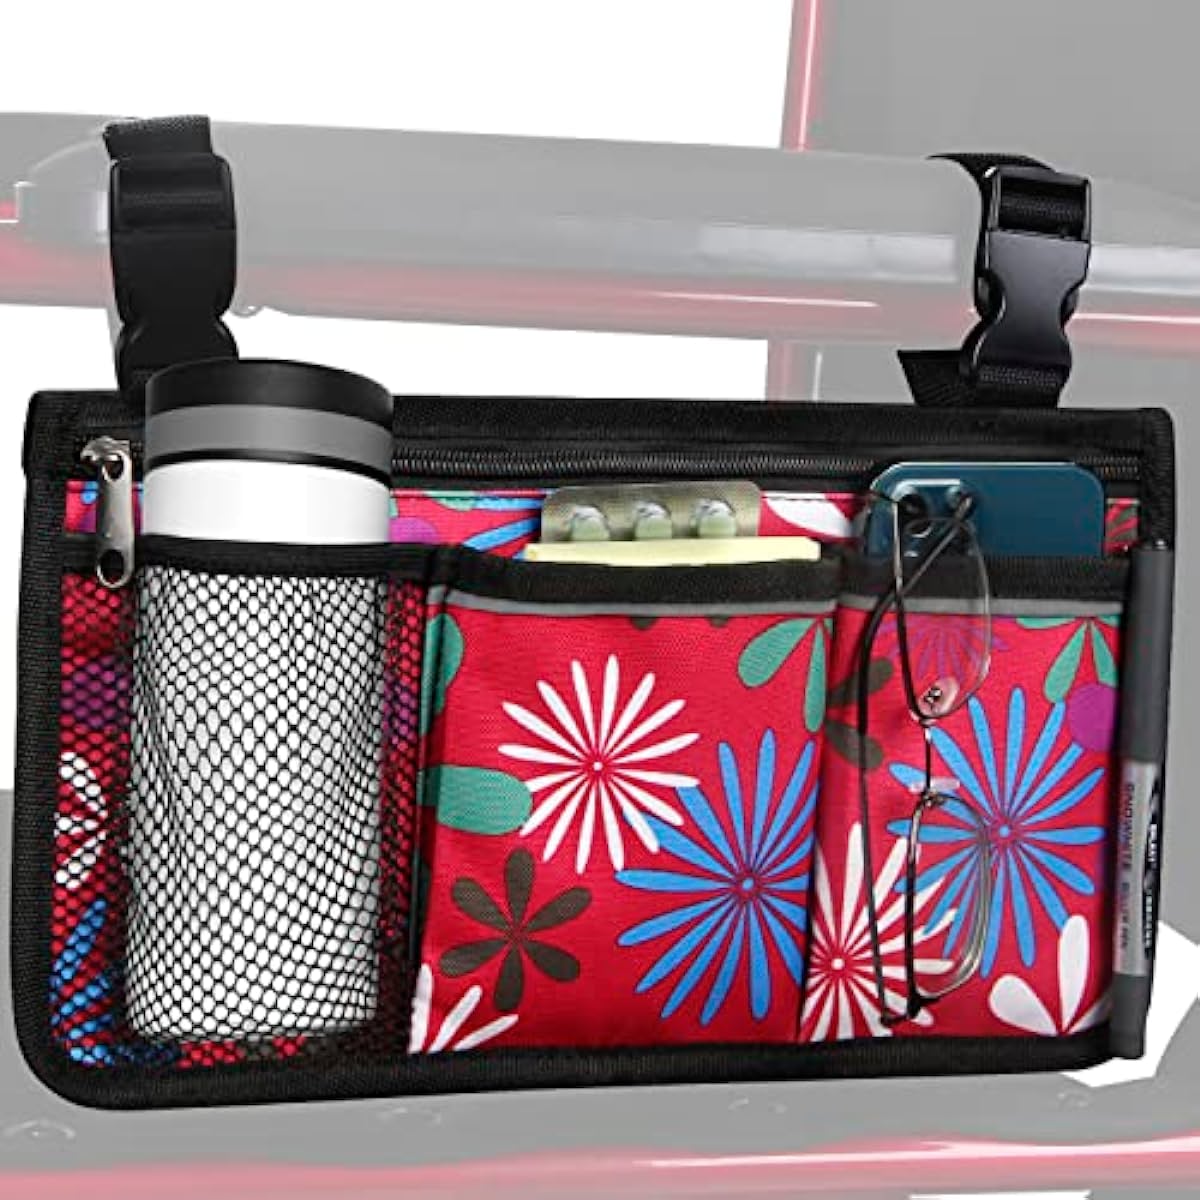 Wheelchair Side Organizer Storage Bag Armrest Pouch with Cup Holder and Reflective Stripe Use Waterproof Fabric, for Most Wheelchairs, Walkers or Rollators (Red Fireworks)